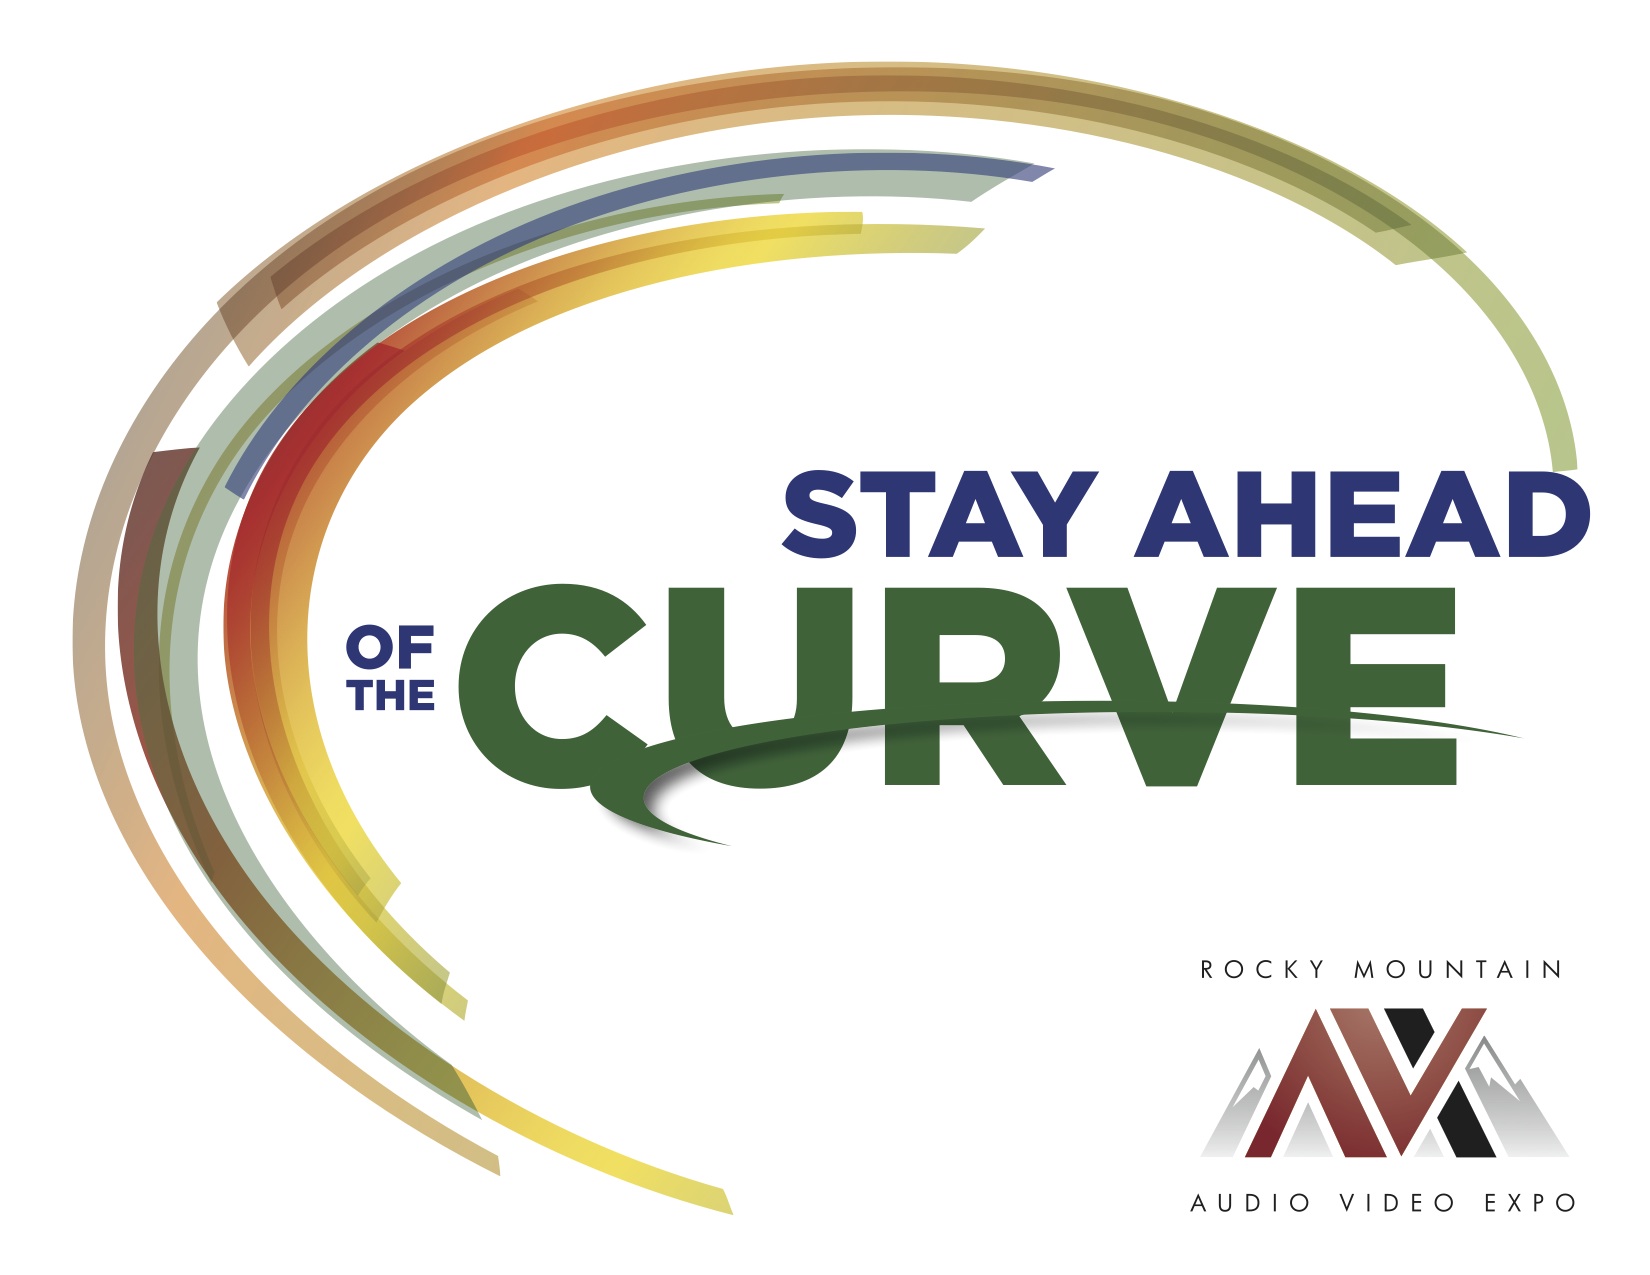 Featuring over 150 manufacturers, speakers, & workshops, the 2015 AVXpo offers audiovisual & multimedia professionals the chance to ‘Stay Ahead of the Curve’ in the industry.